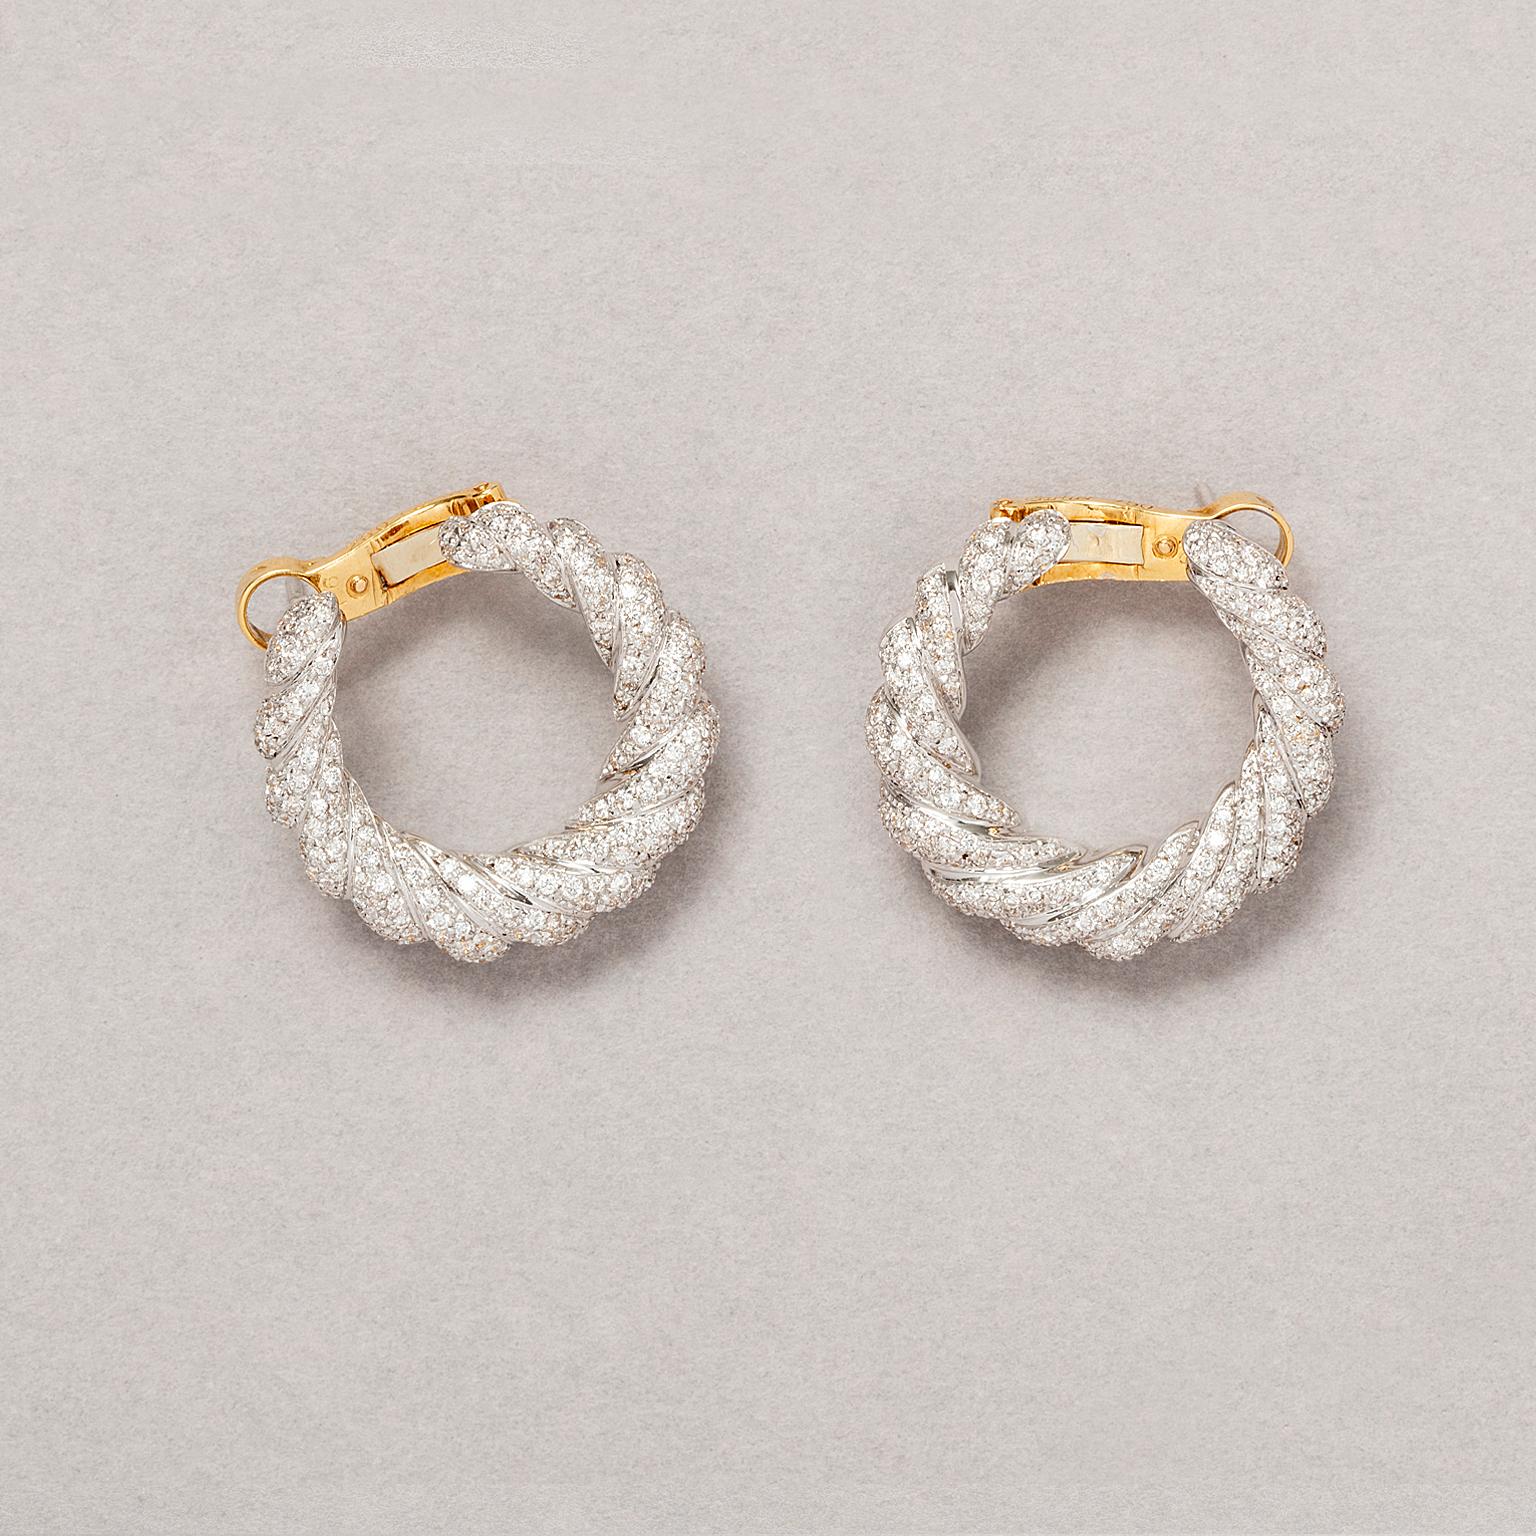 A pair of 18 carat white and yellow gold earrings. White gold twisted, garland like hoops, set with 430 brilliant cut diamonds (in total app. 2.5 carat G-H, Si). Signed and numbered: Cartier, 608592, with the original box.

weight: 16.10